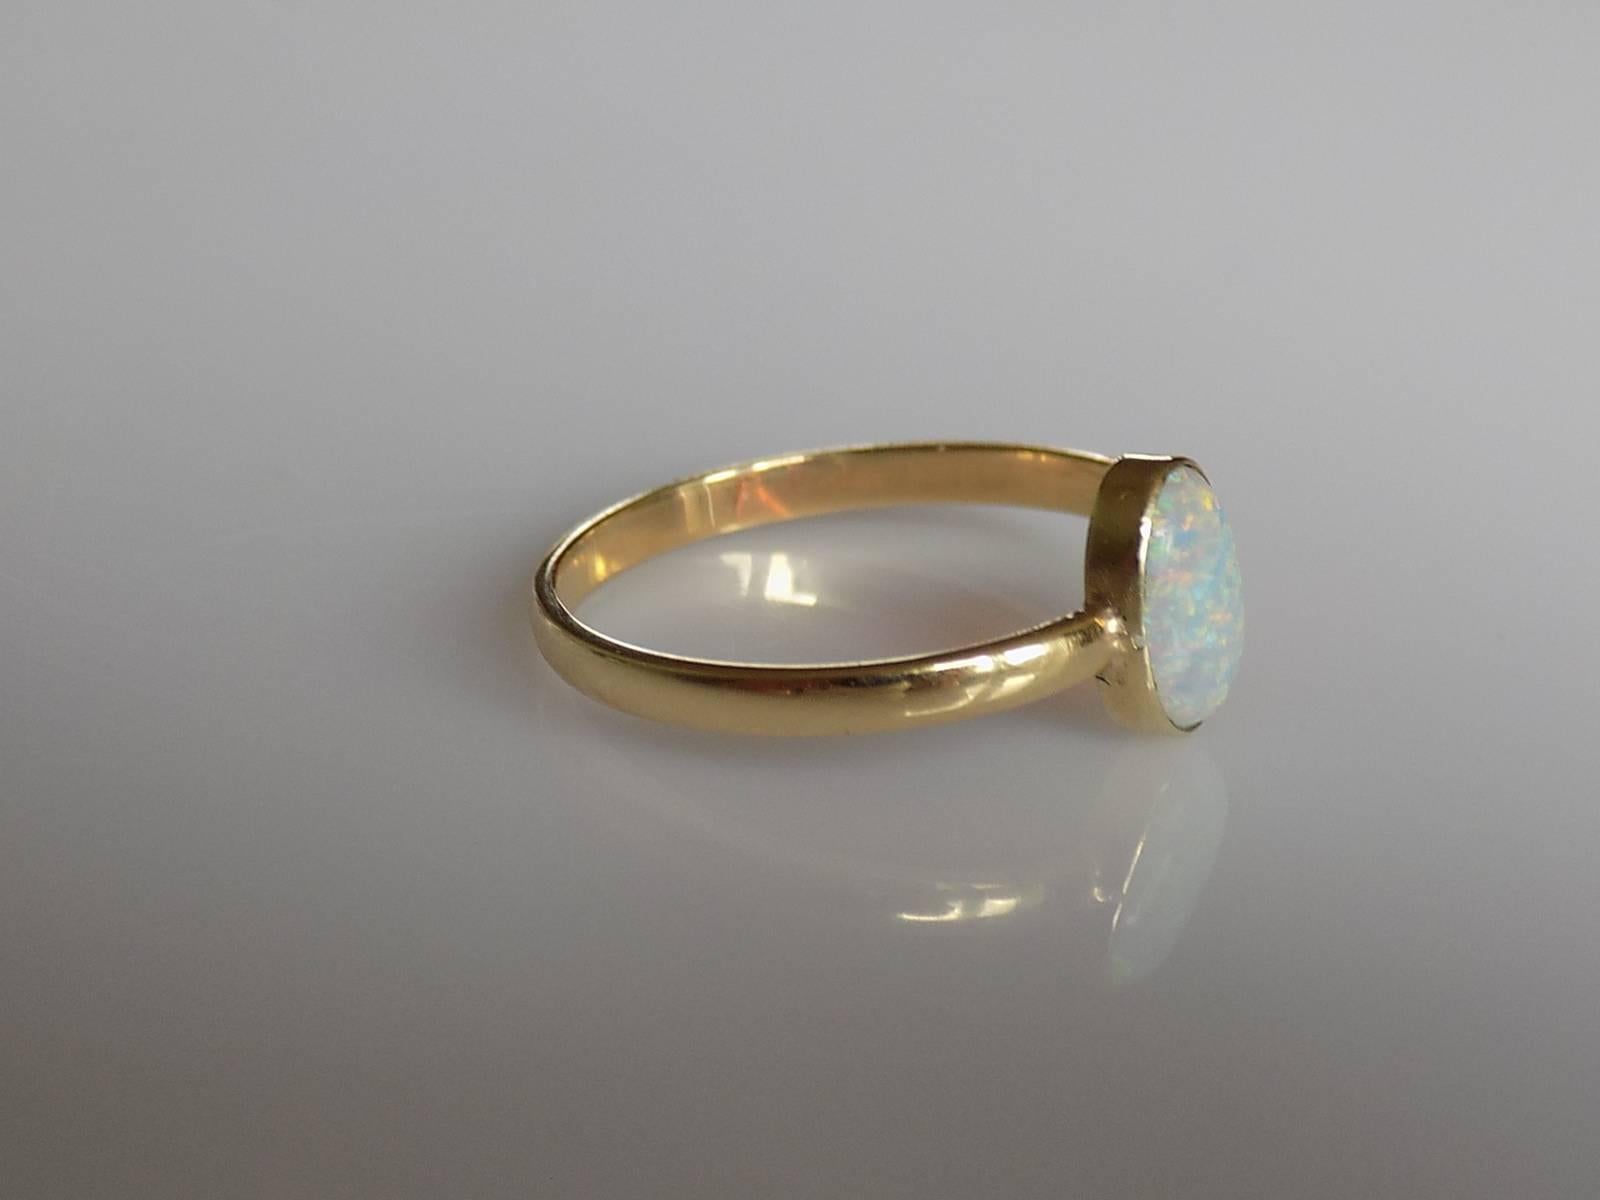 A Beautiful Victorian Australian Opal stick pin conversion ring on a later 18 Carat Gold shank. Perfect as everyday ring. English origin.
Size Q 1/2 UK, 8.75 US can be sized.
Opal 9mm x 6mm.
Weight 1.9gr.
London hallmark for 18 Carat Gold.
The ring